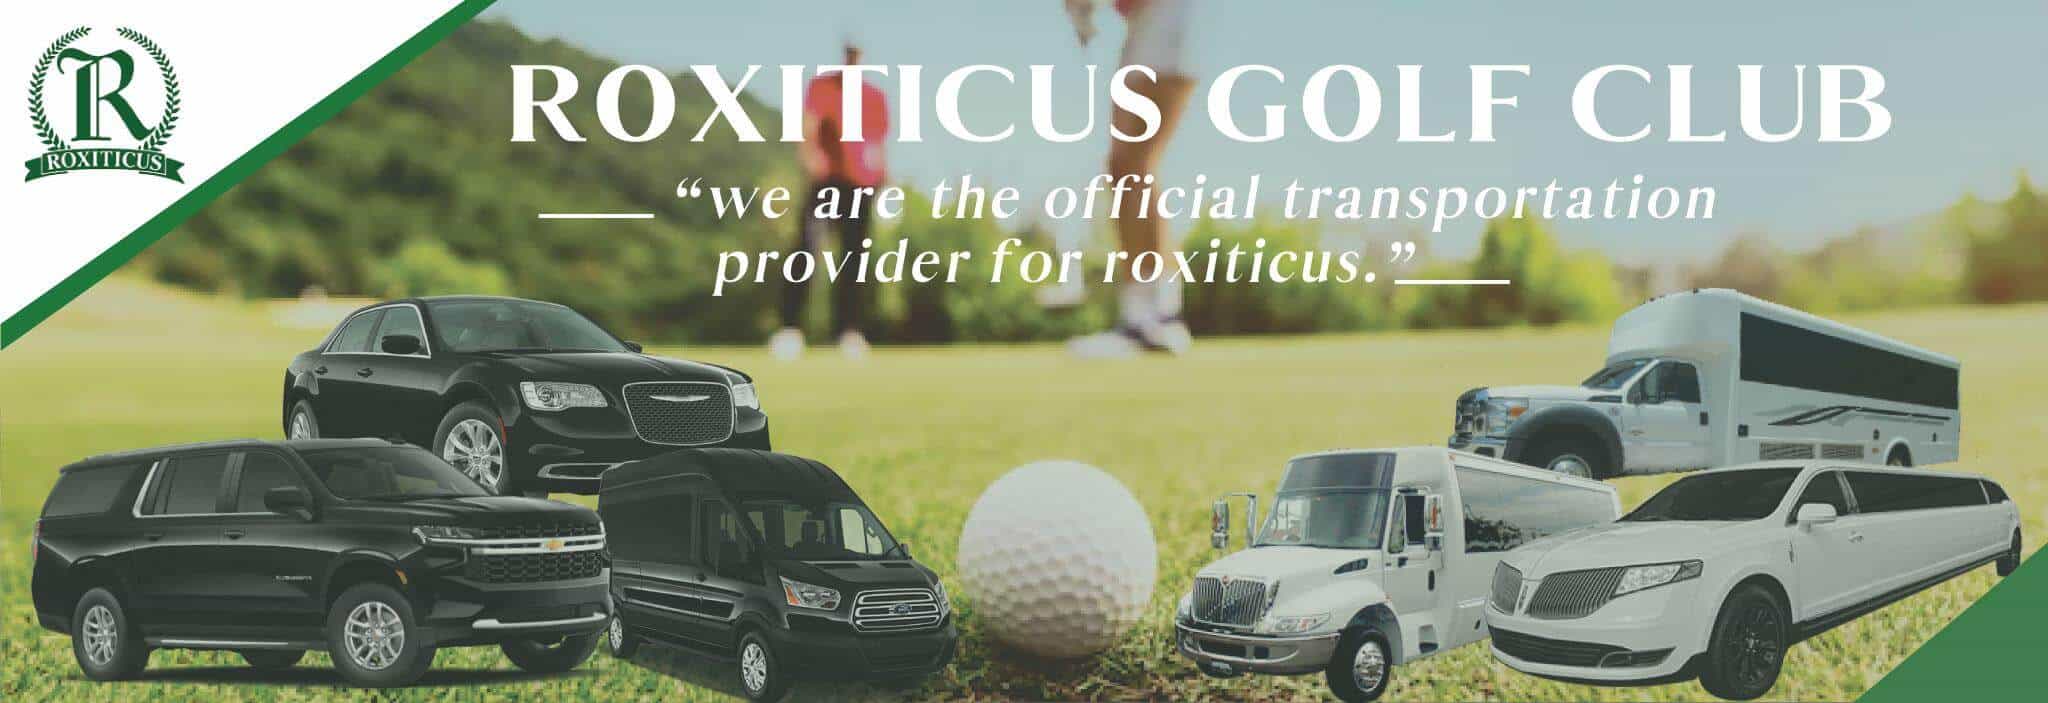 Roxiticus golf club with a blurry background of a golfer